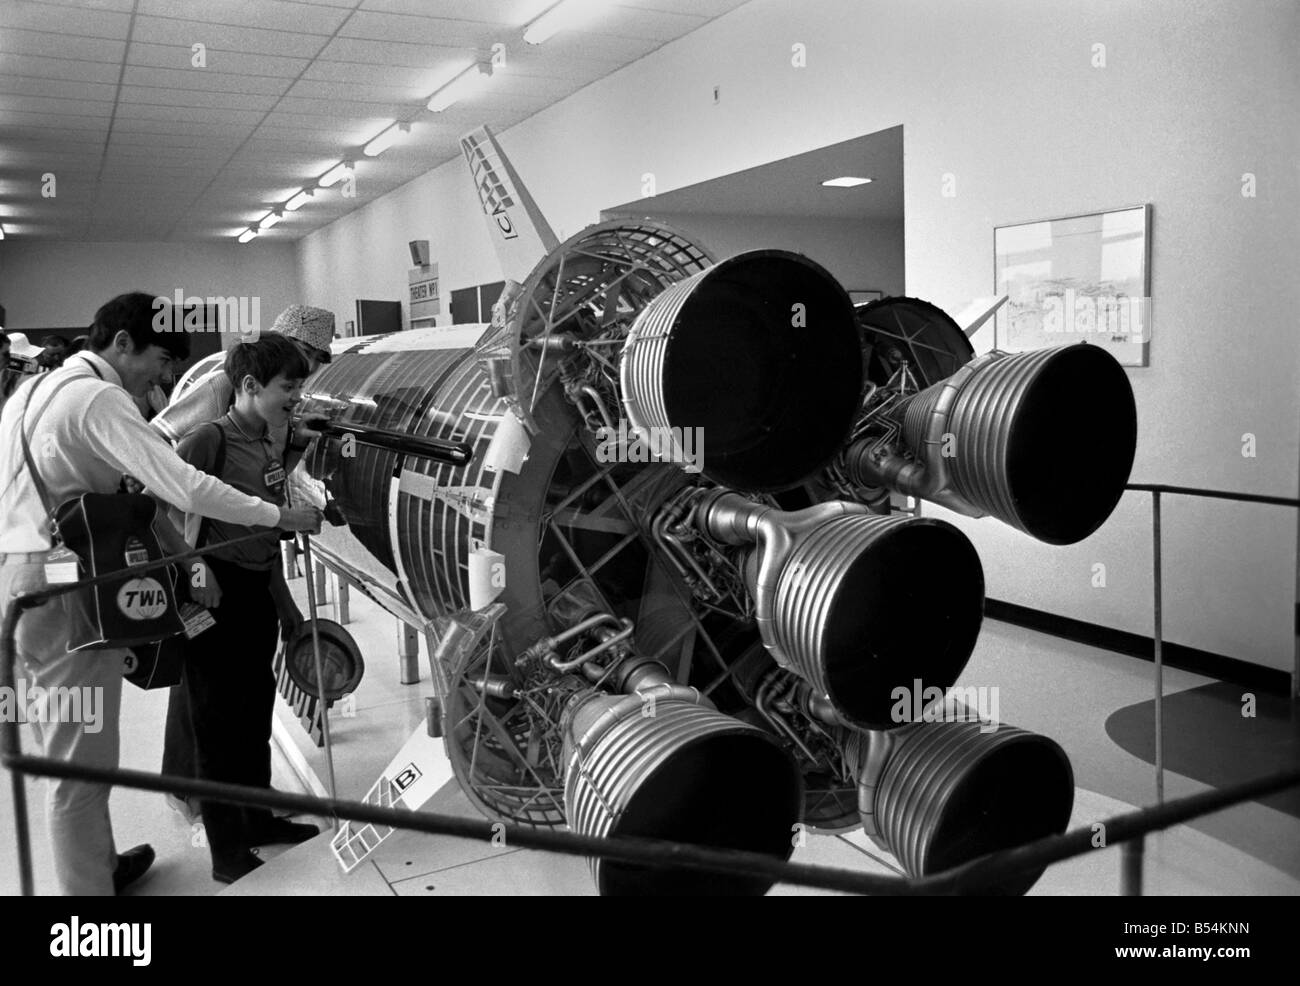 Visitors at NASA Space Station in Florida, U.S.A a few hours before Apollo 12 blasted off on a mission to the moon. Looking at Stock Photo